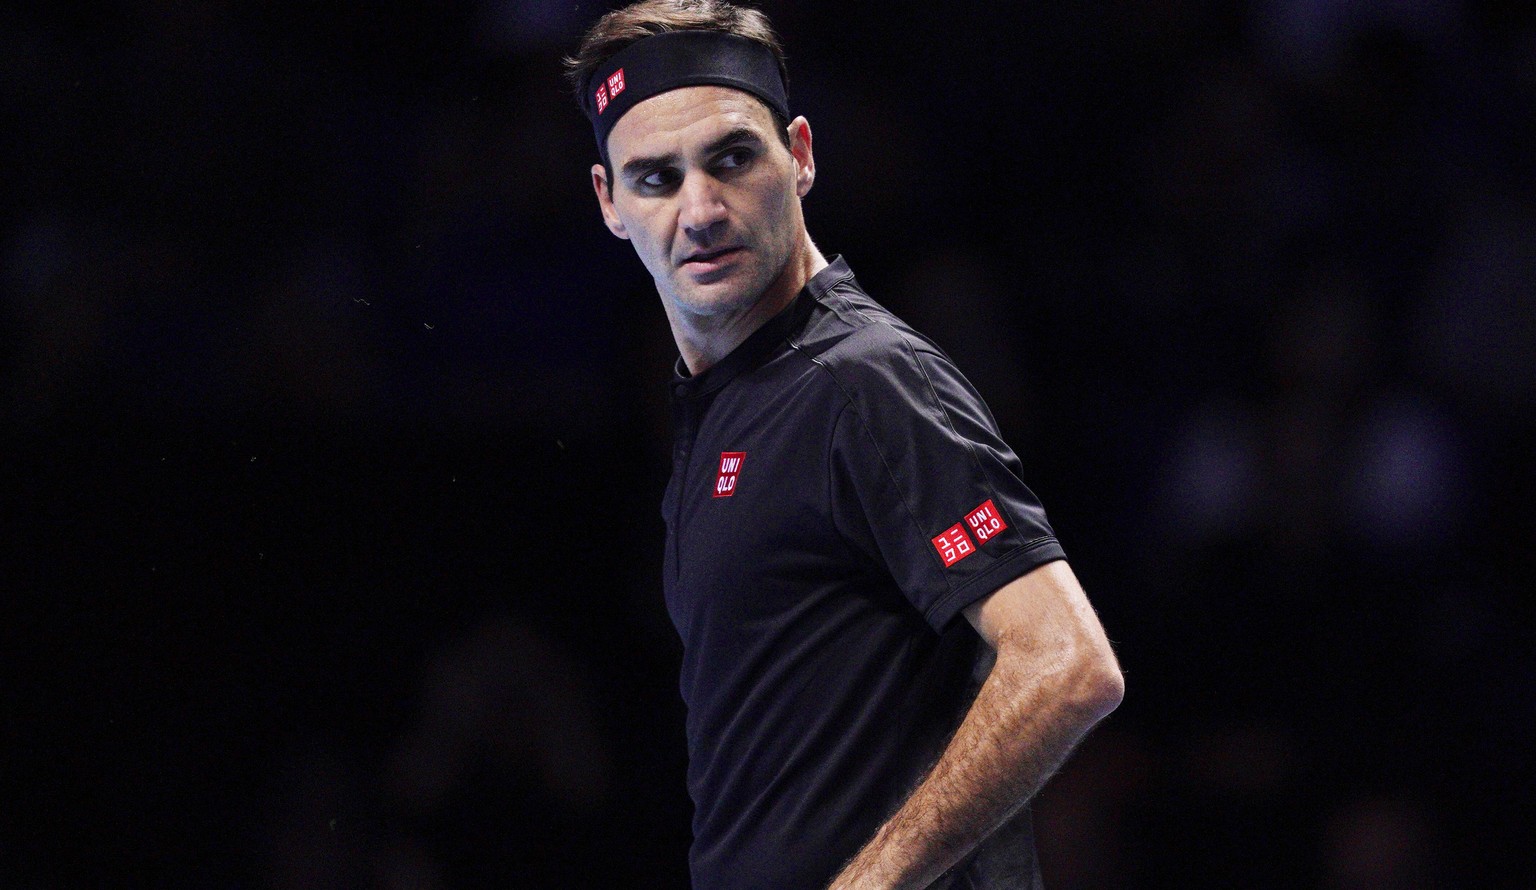 epa07987029 Roger Federer of Switzerland reacts during his round robin match against Dominic Thiem of Austria at the ATP World Tour Finals tennis tournament in London, Britain, 10 November 2019. EPA/W ...